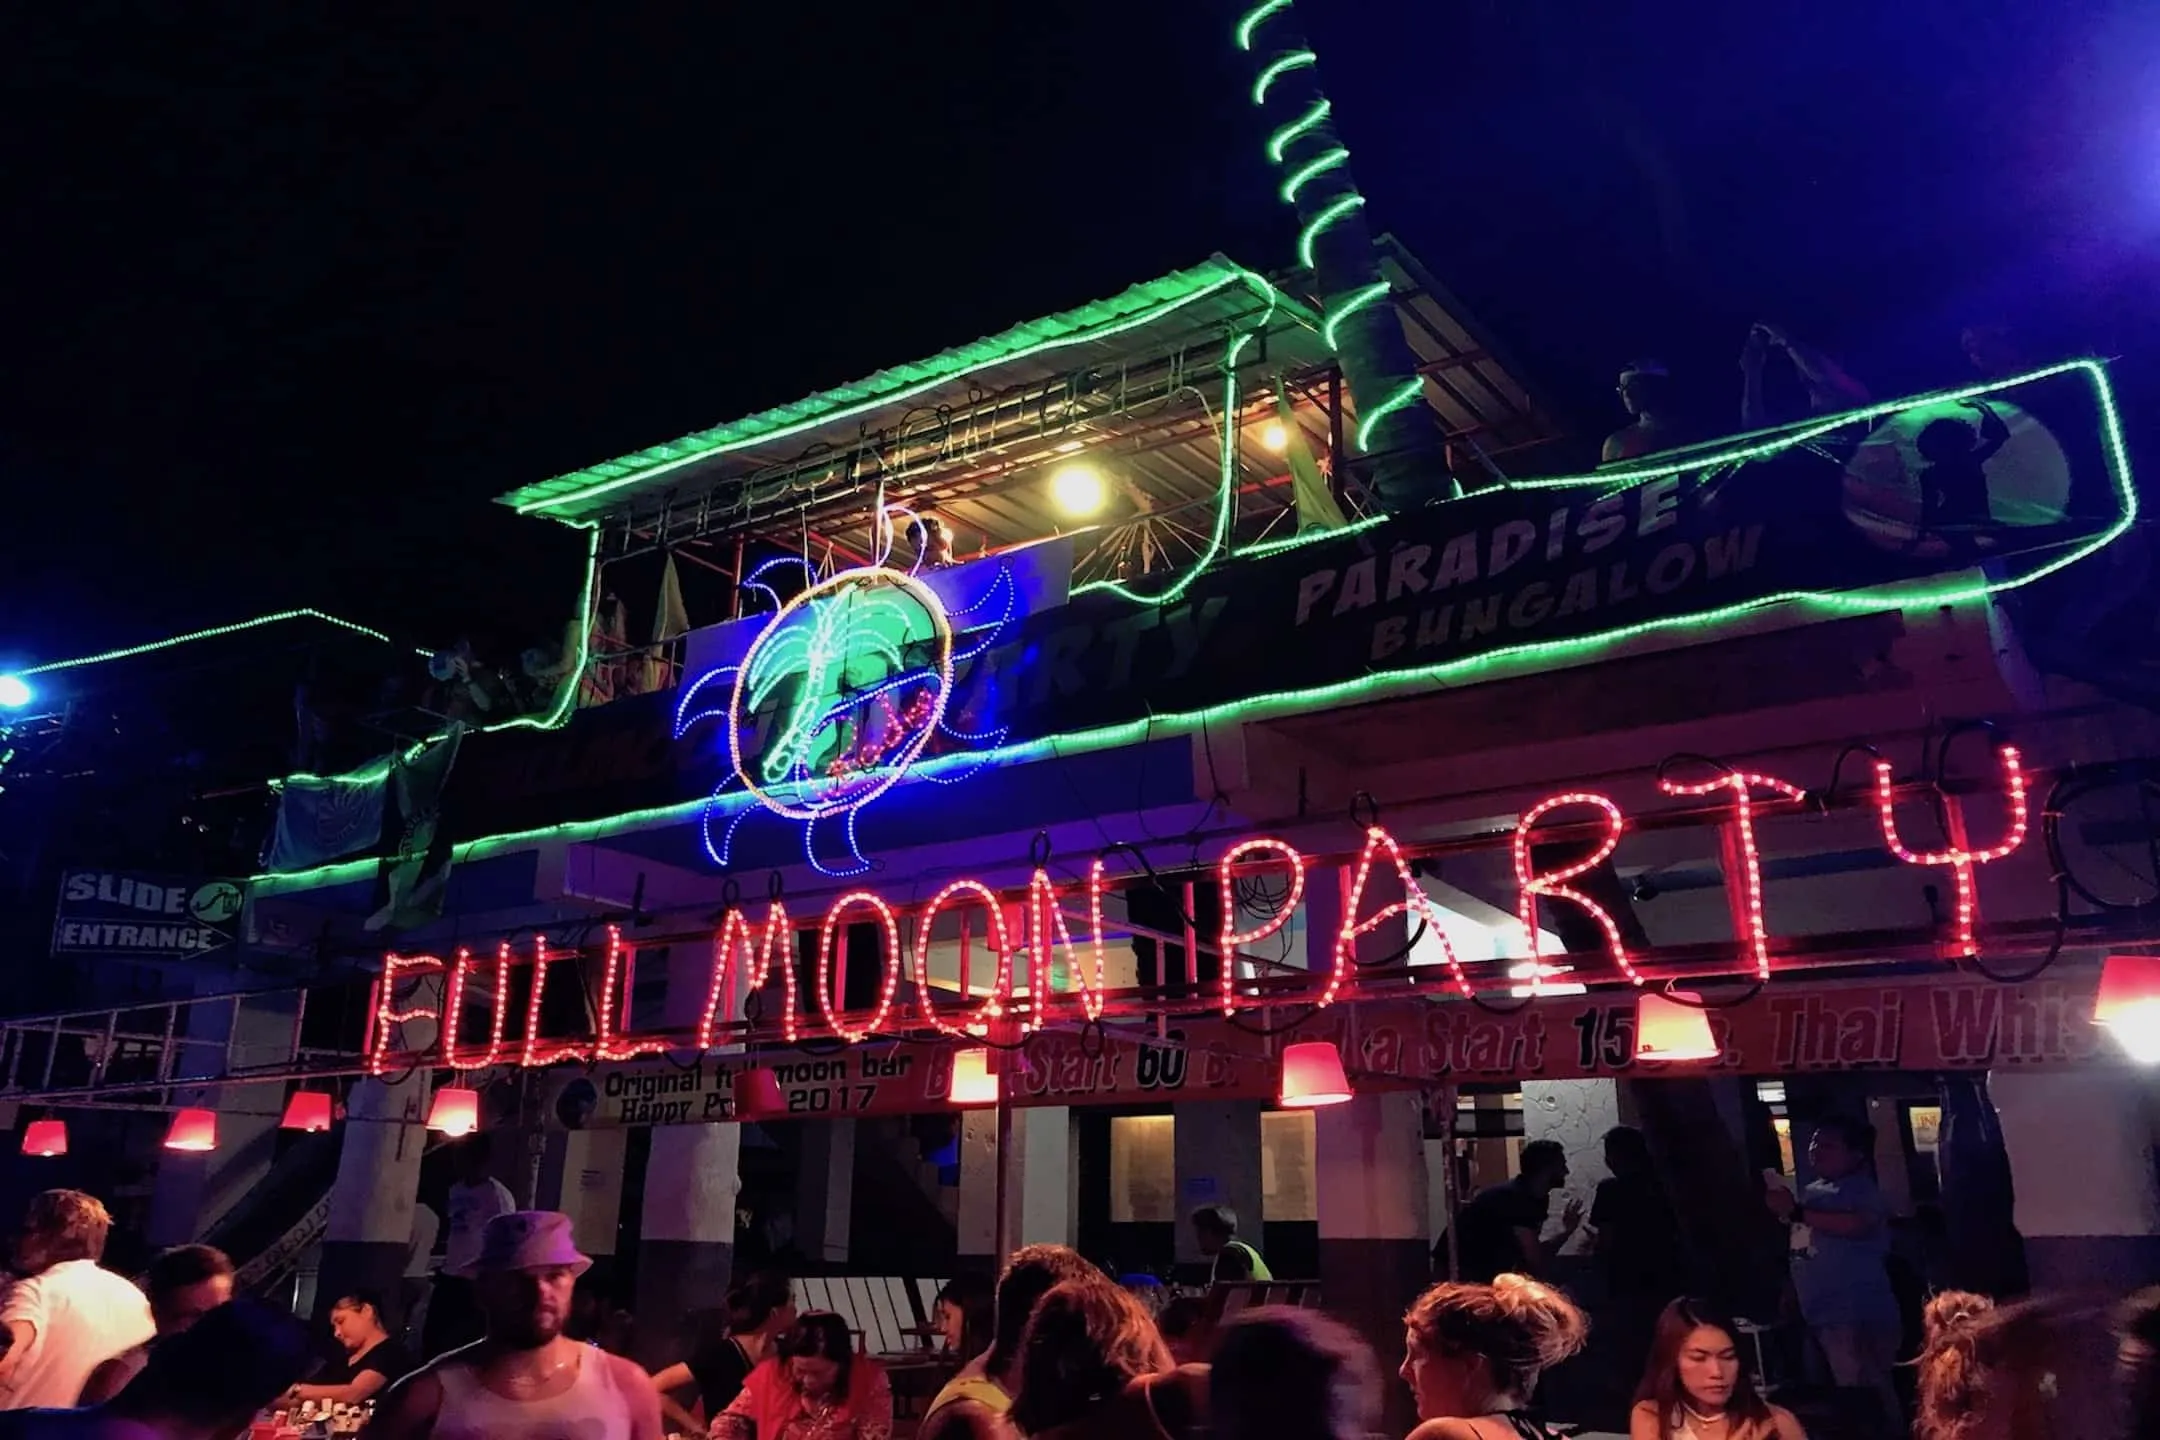 Full Moon Bar in Thailand, Central Asia  - Rated 0.7